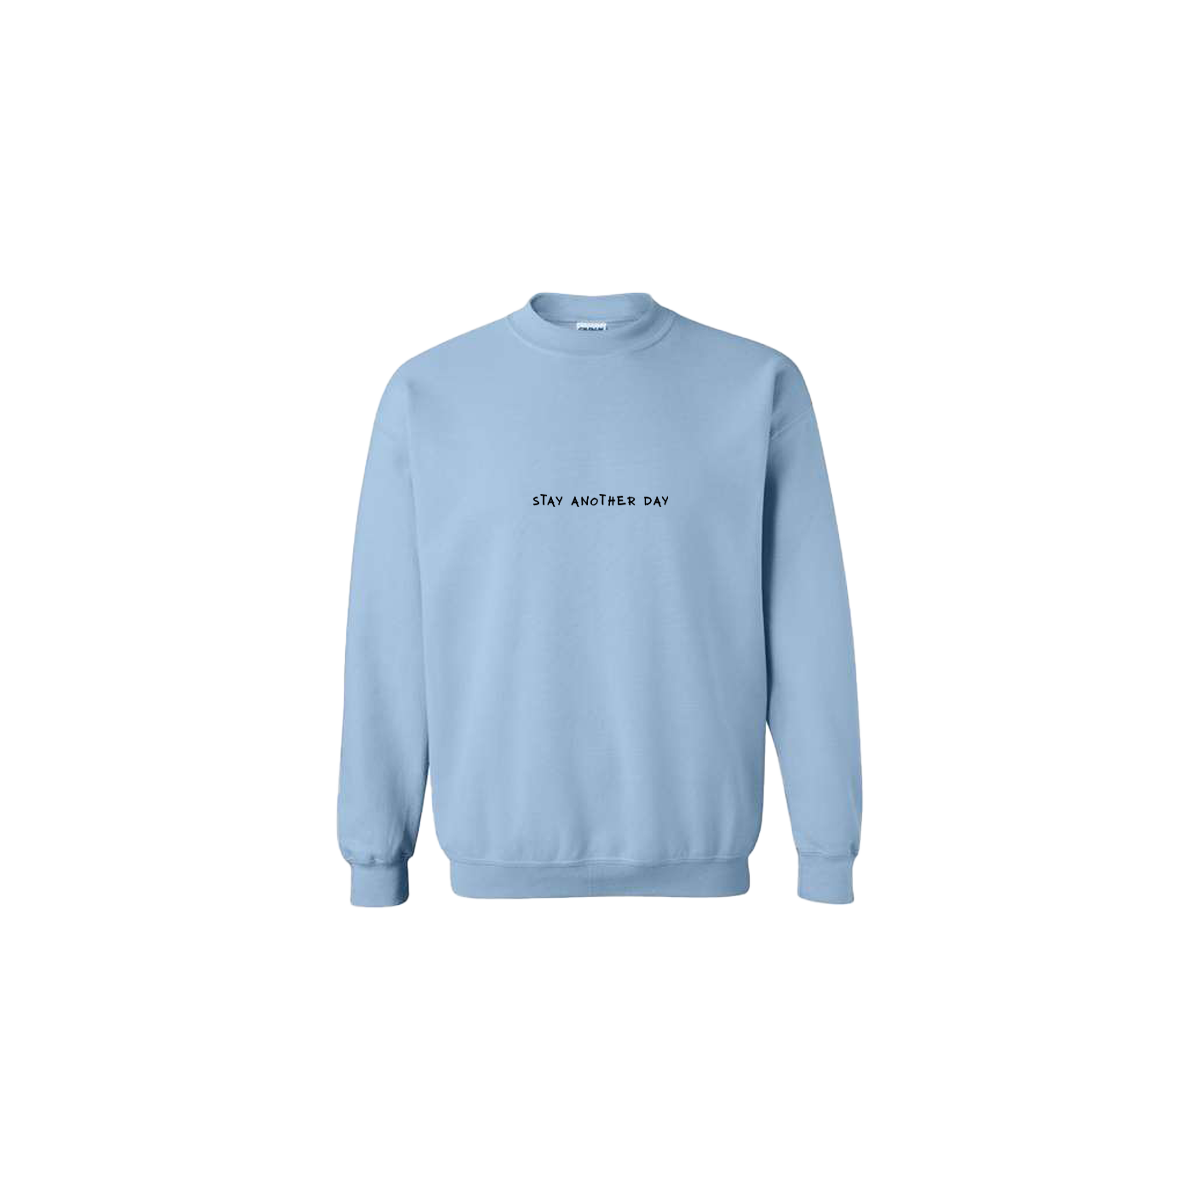 Stay Another Day Text Embroidered Light Blue Crewneck - Mental Health Awareness Clothing